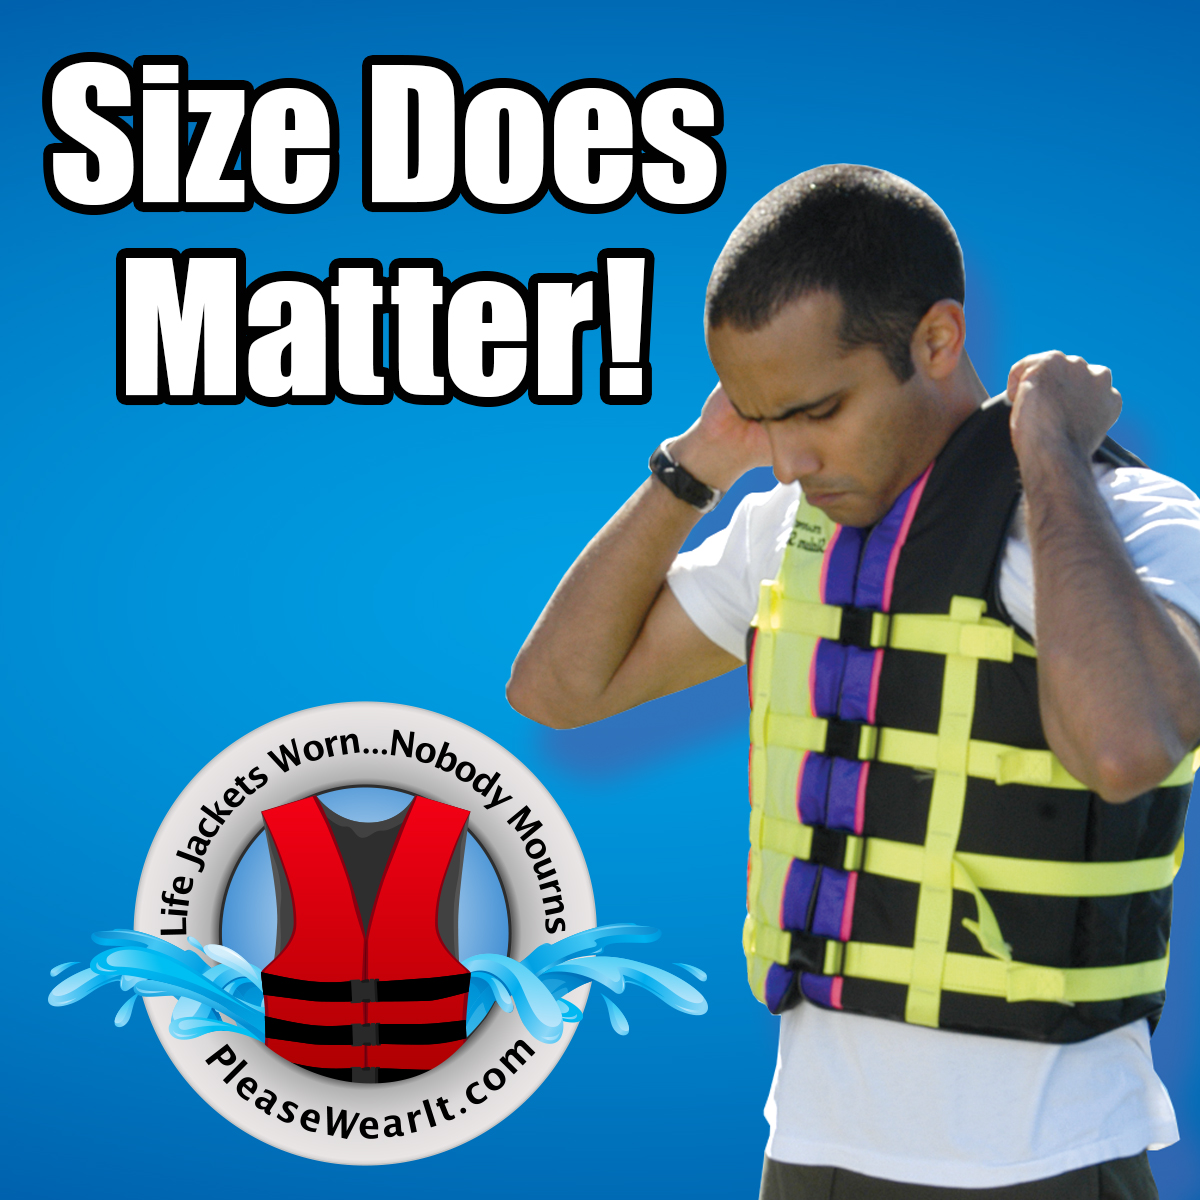 Does your life jacket fit you properly? Make sure it’s buckled/zipped up, fits snug, and when you lift up on the shoulders it does not go over your chin. #LifeJacketsWornNobodyMourns #BuildingStrong #USACEMVD